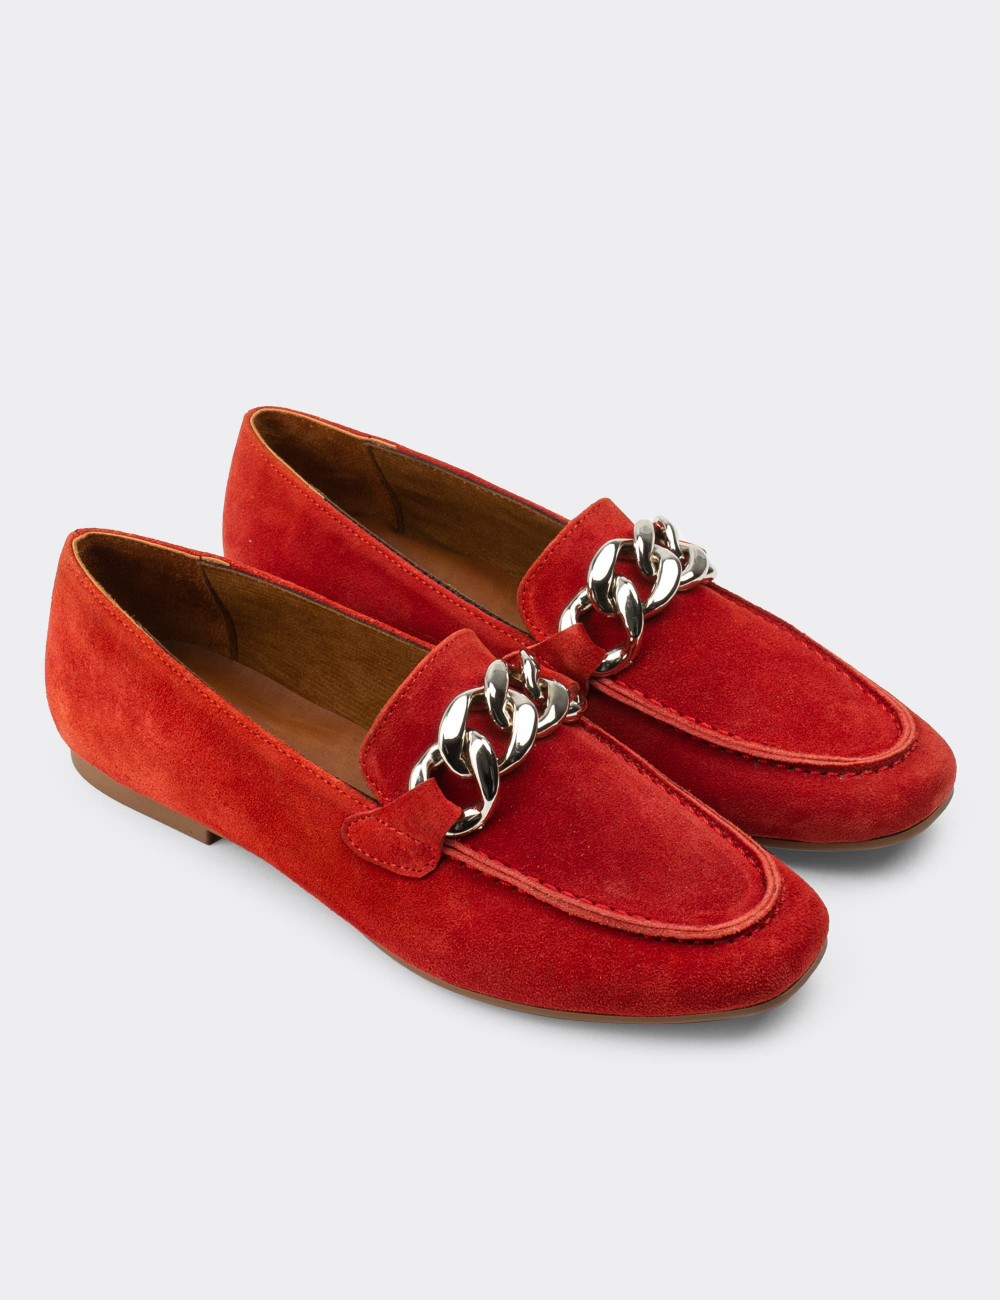 Red Suede Leather Loafers - 01915ZKRMC01